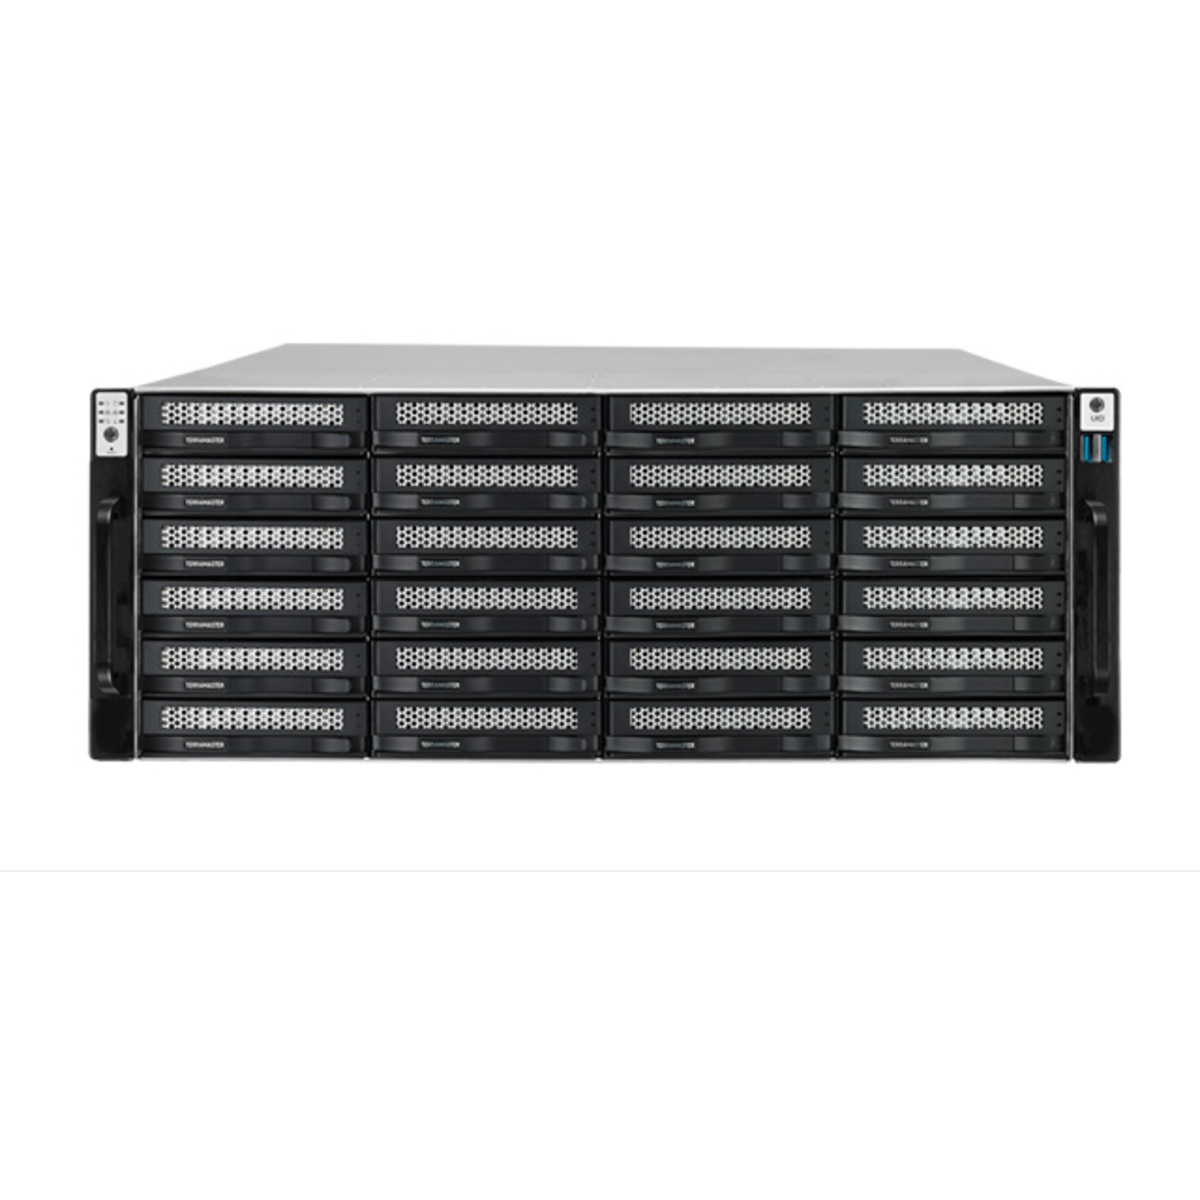 TerraMaster U24-722-2224 288tb 24-Bay RackMount Large Business / Enterprise NAS - Network Attached Storage Device 18x16tb Seagate EXOS X18 ST16000NM000J 3.5 7200rpm SATA 6Gb/s HDD ENTERPRISE Class Drives Installed - Burn-In Tested U24-722-2224